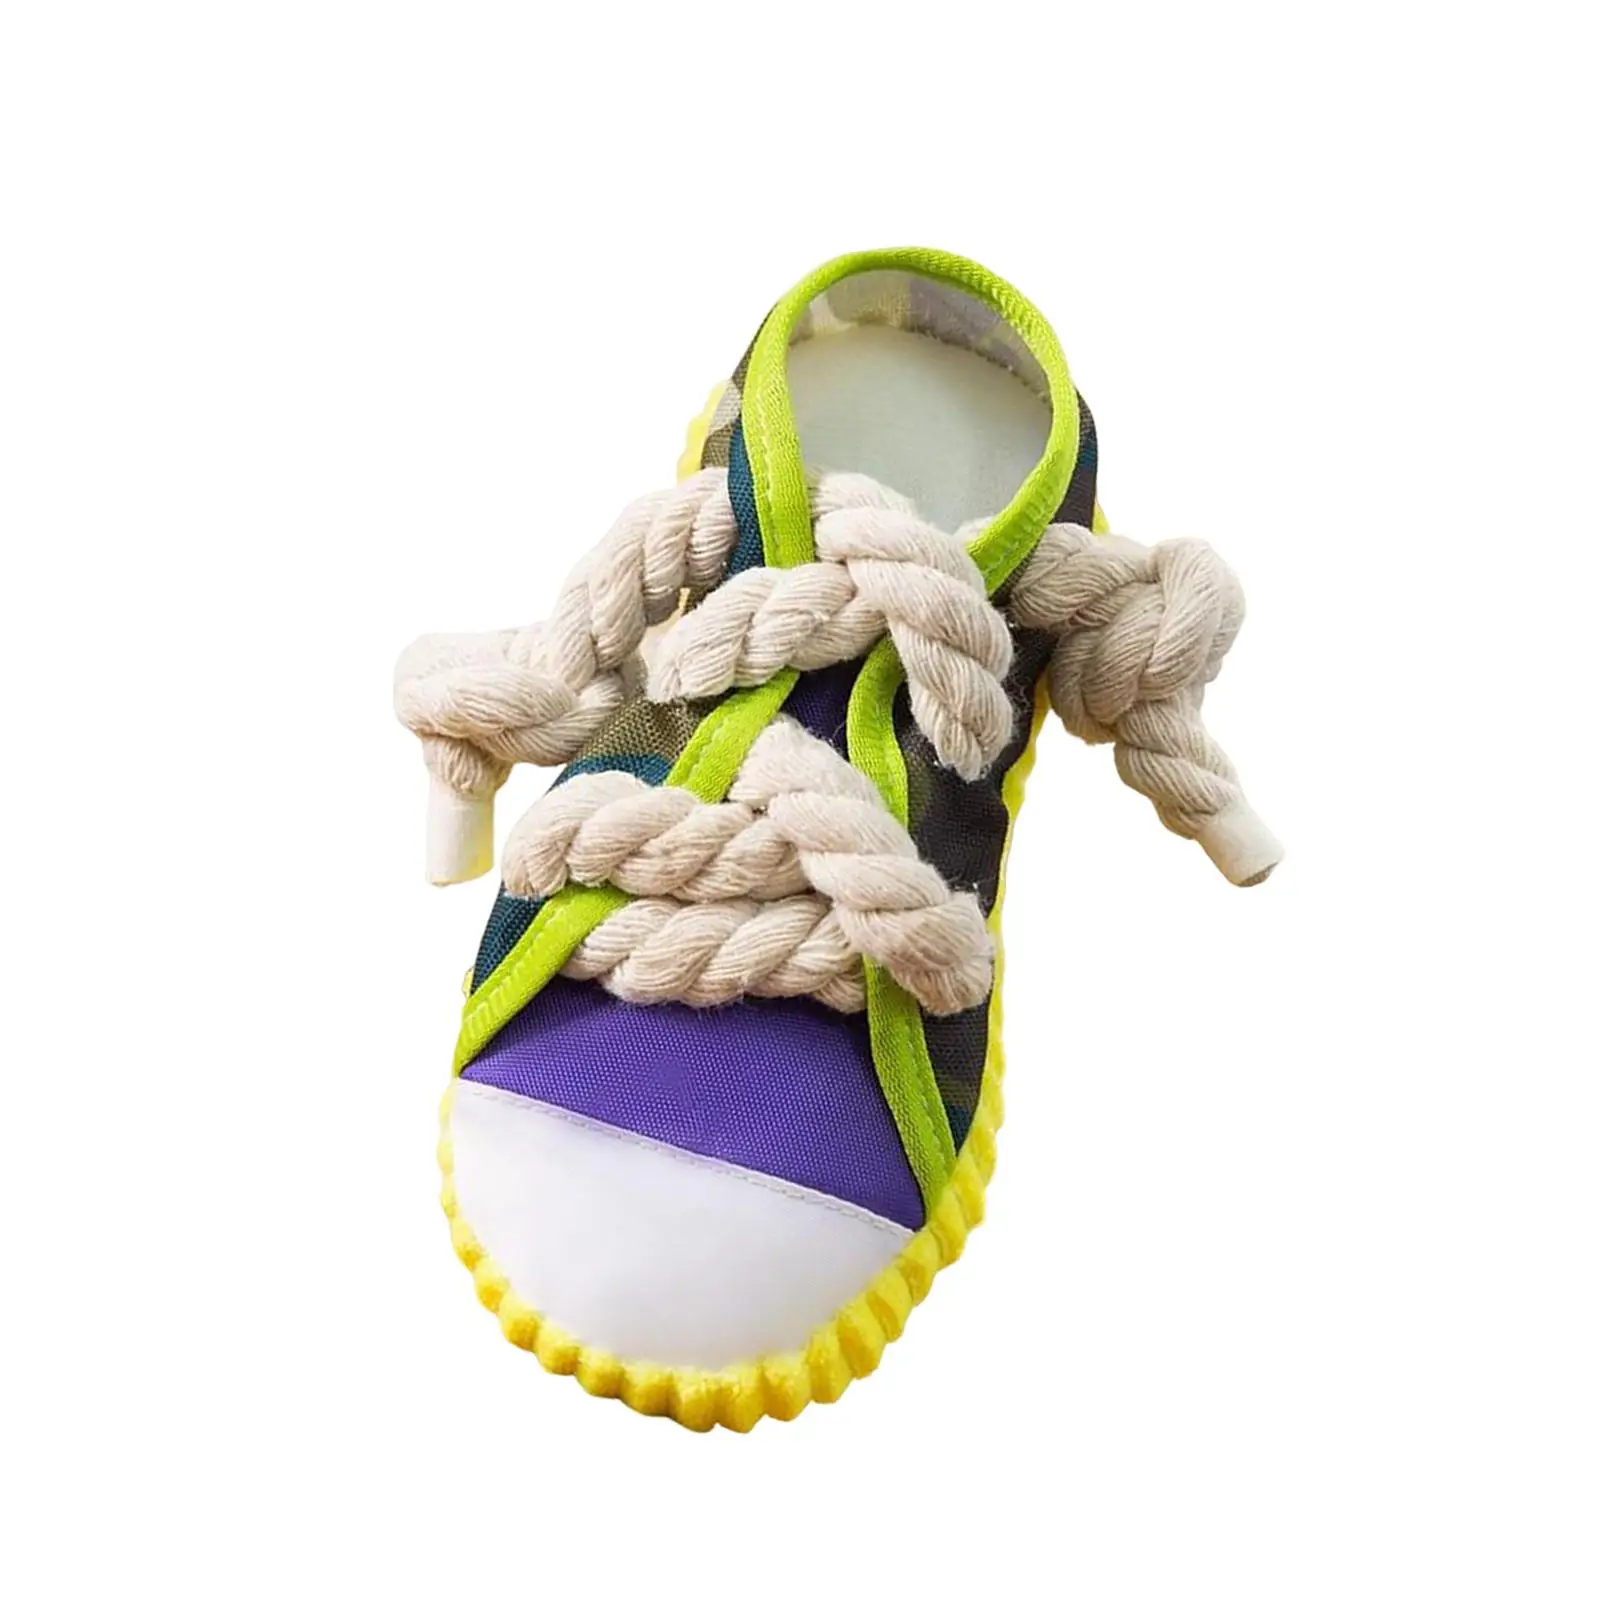 Dog Bite Tug Toy Squeaky Exercise Training Tear Resistant Teeth Chew Toy Waterproof Interactive Dog Toys for Park Lawn Garden